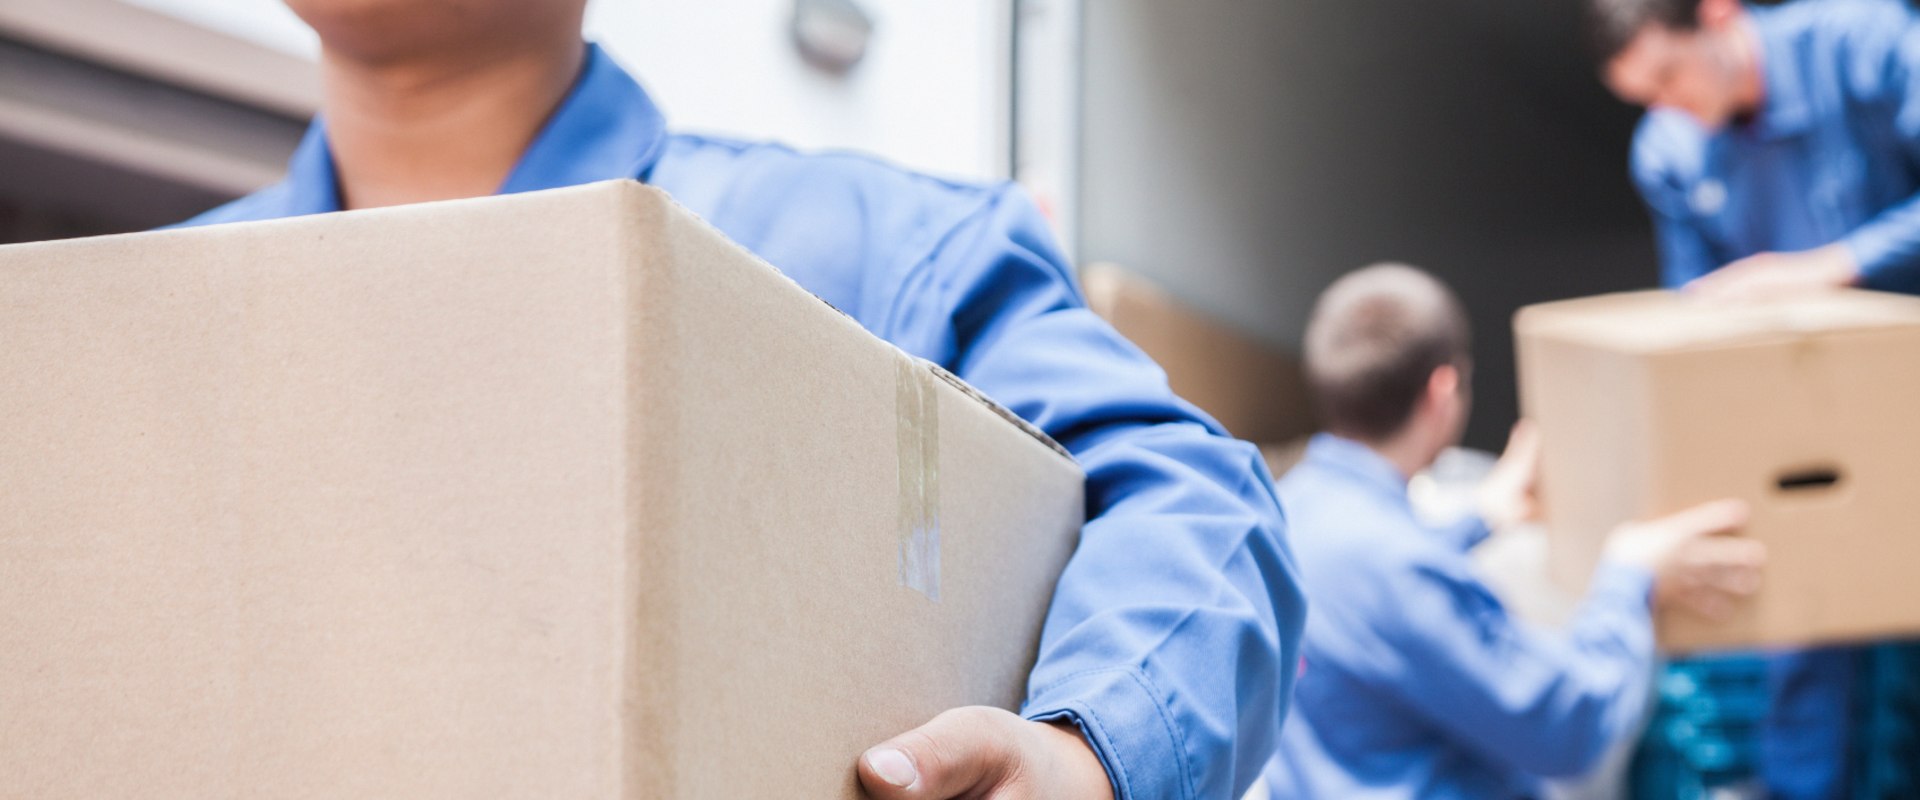 The Best Time to Move: Save Money on Your Relocation